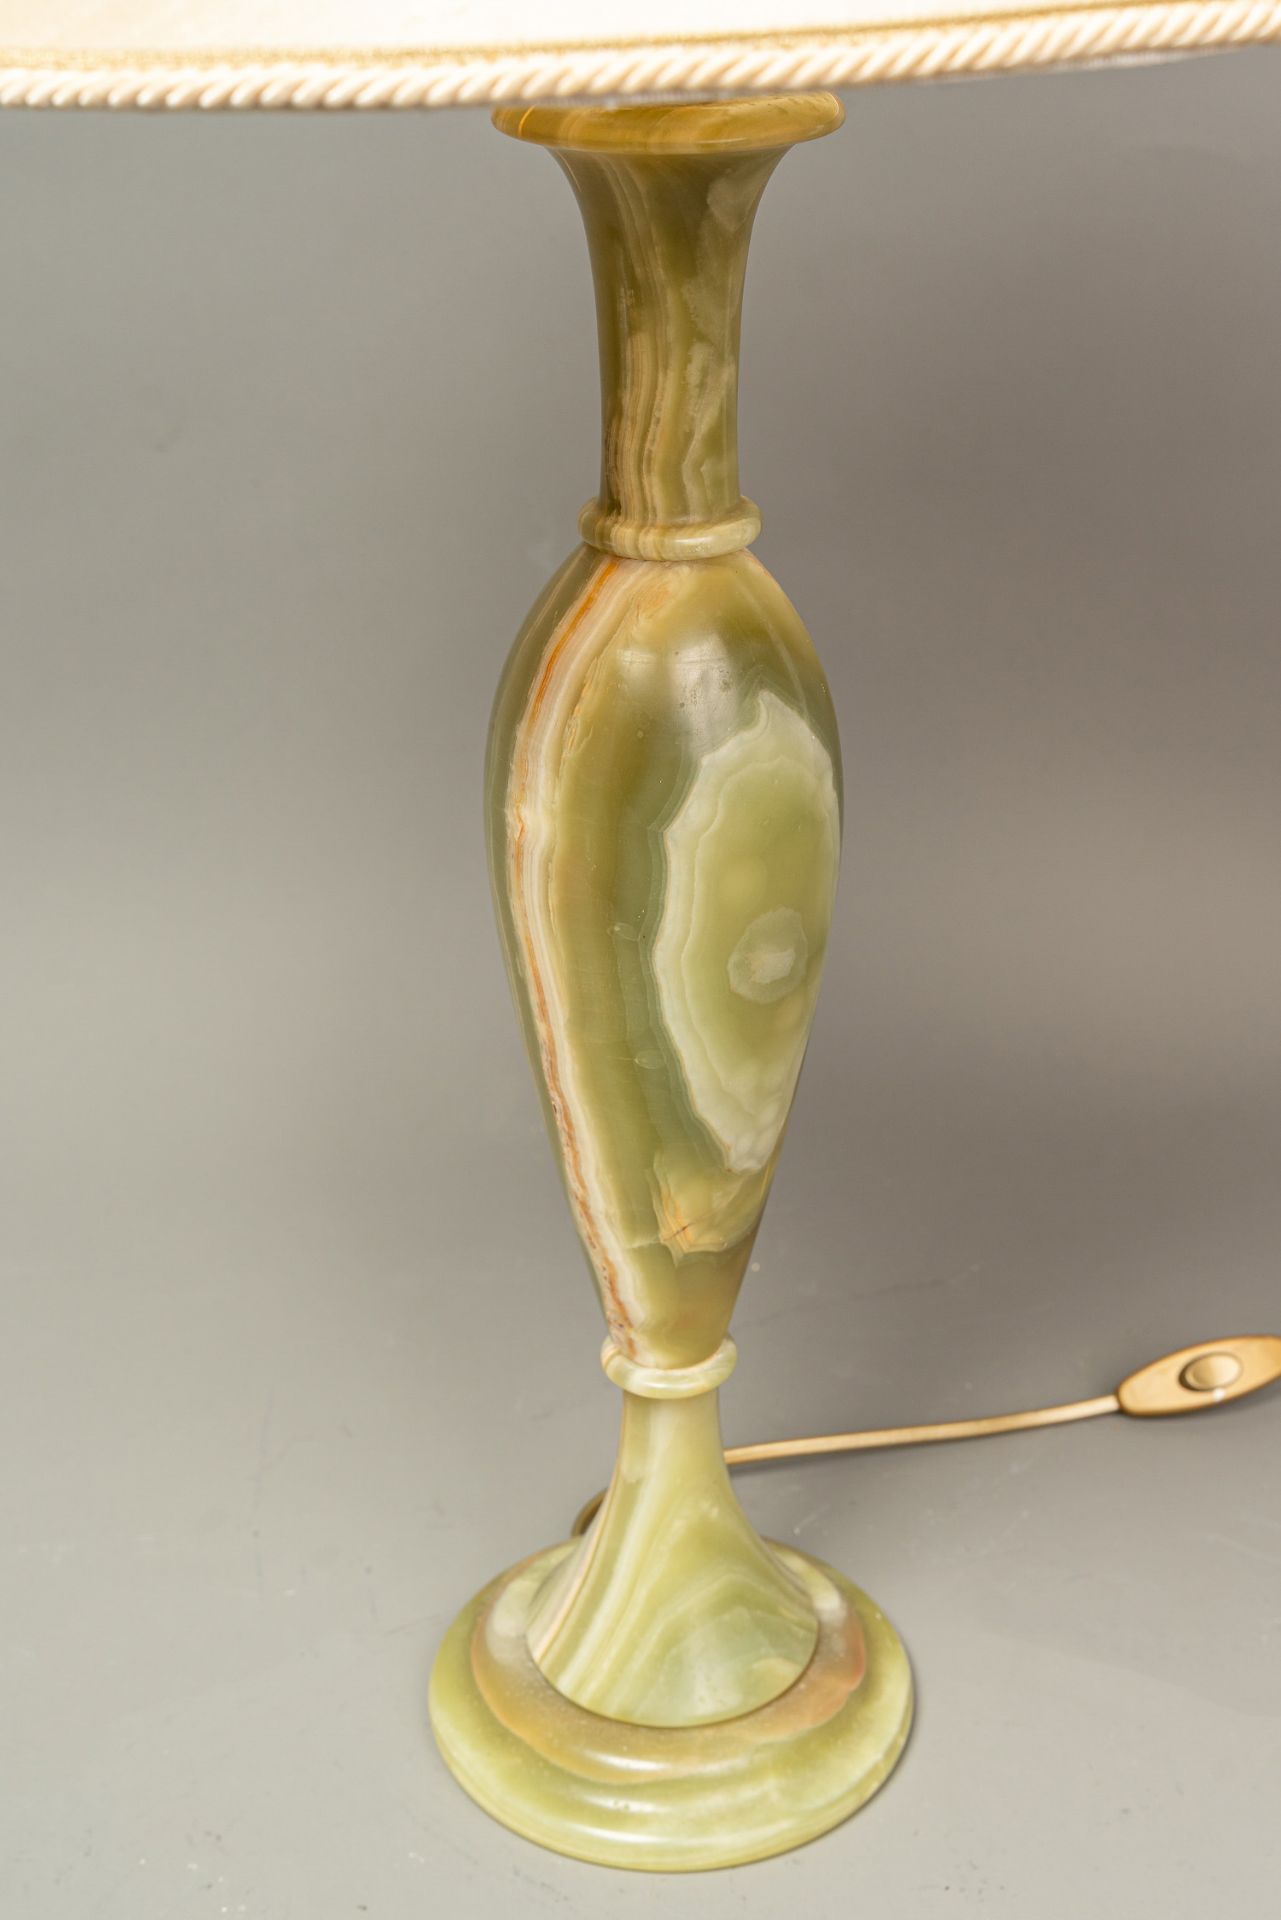 Classical Table Lamp - Image 2 of 3